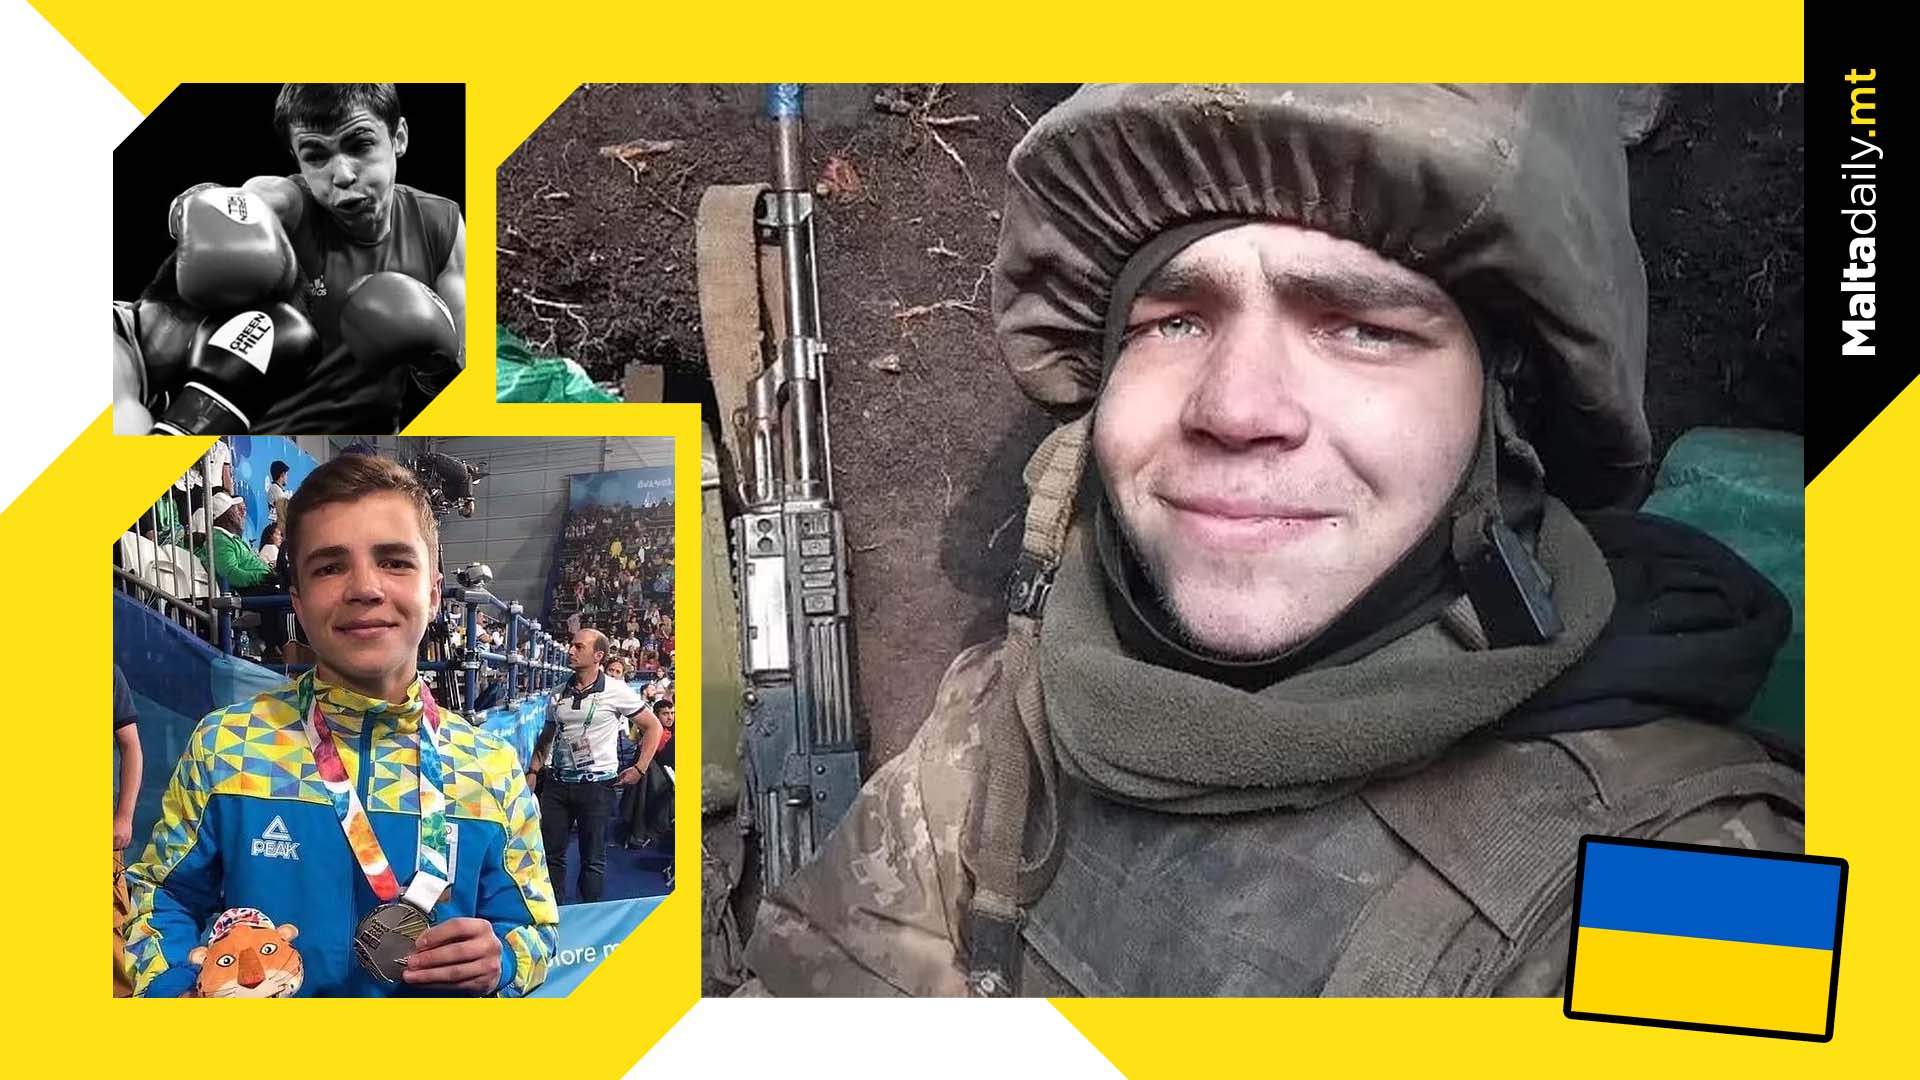 Tributes for 22 year old Ukrainian boxer who died defending country